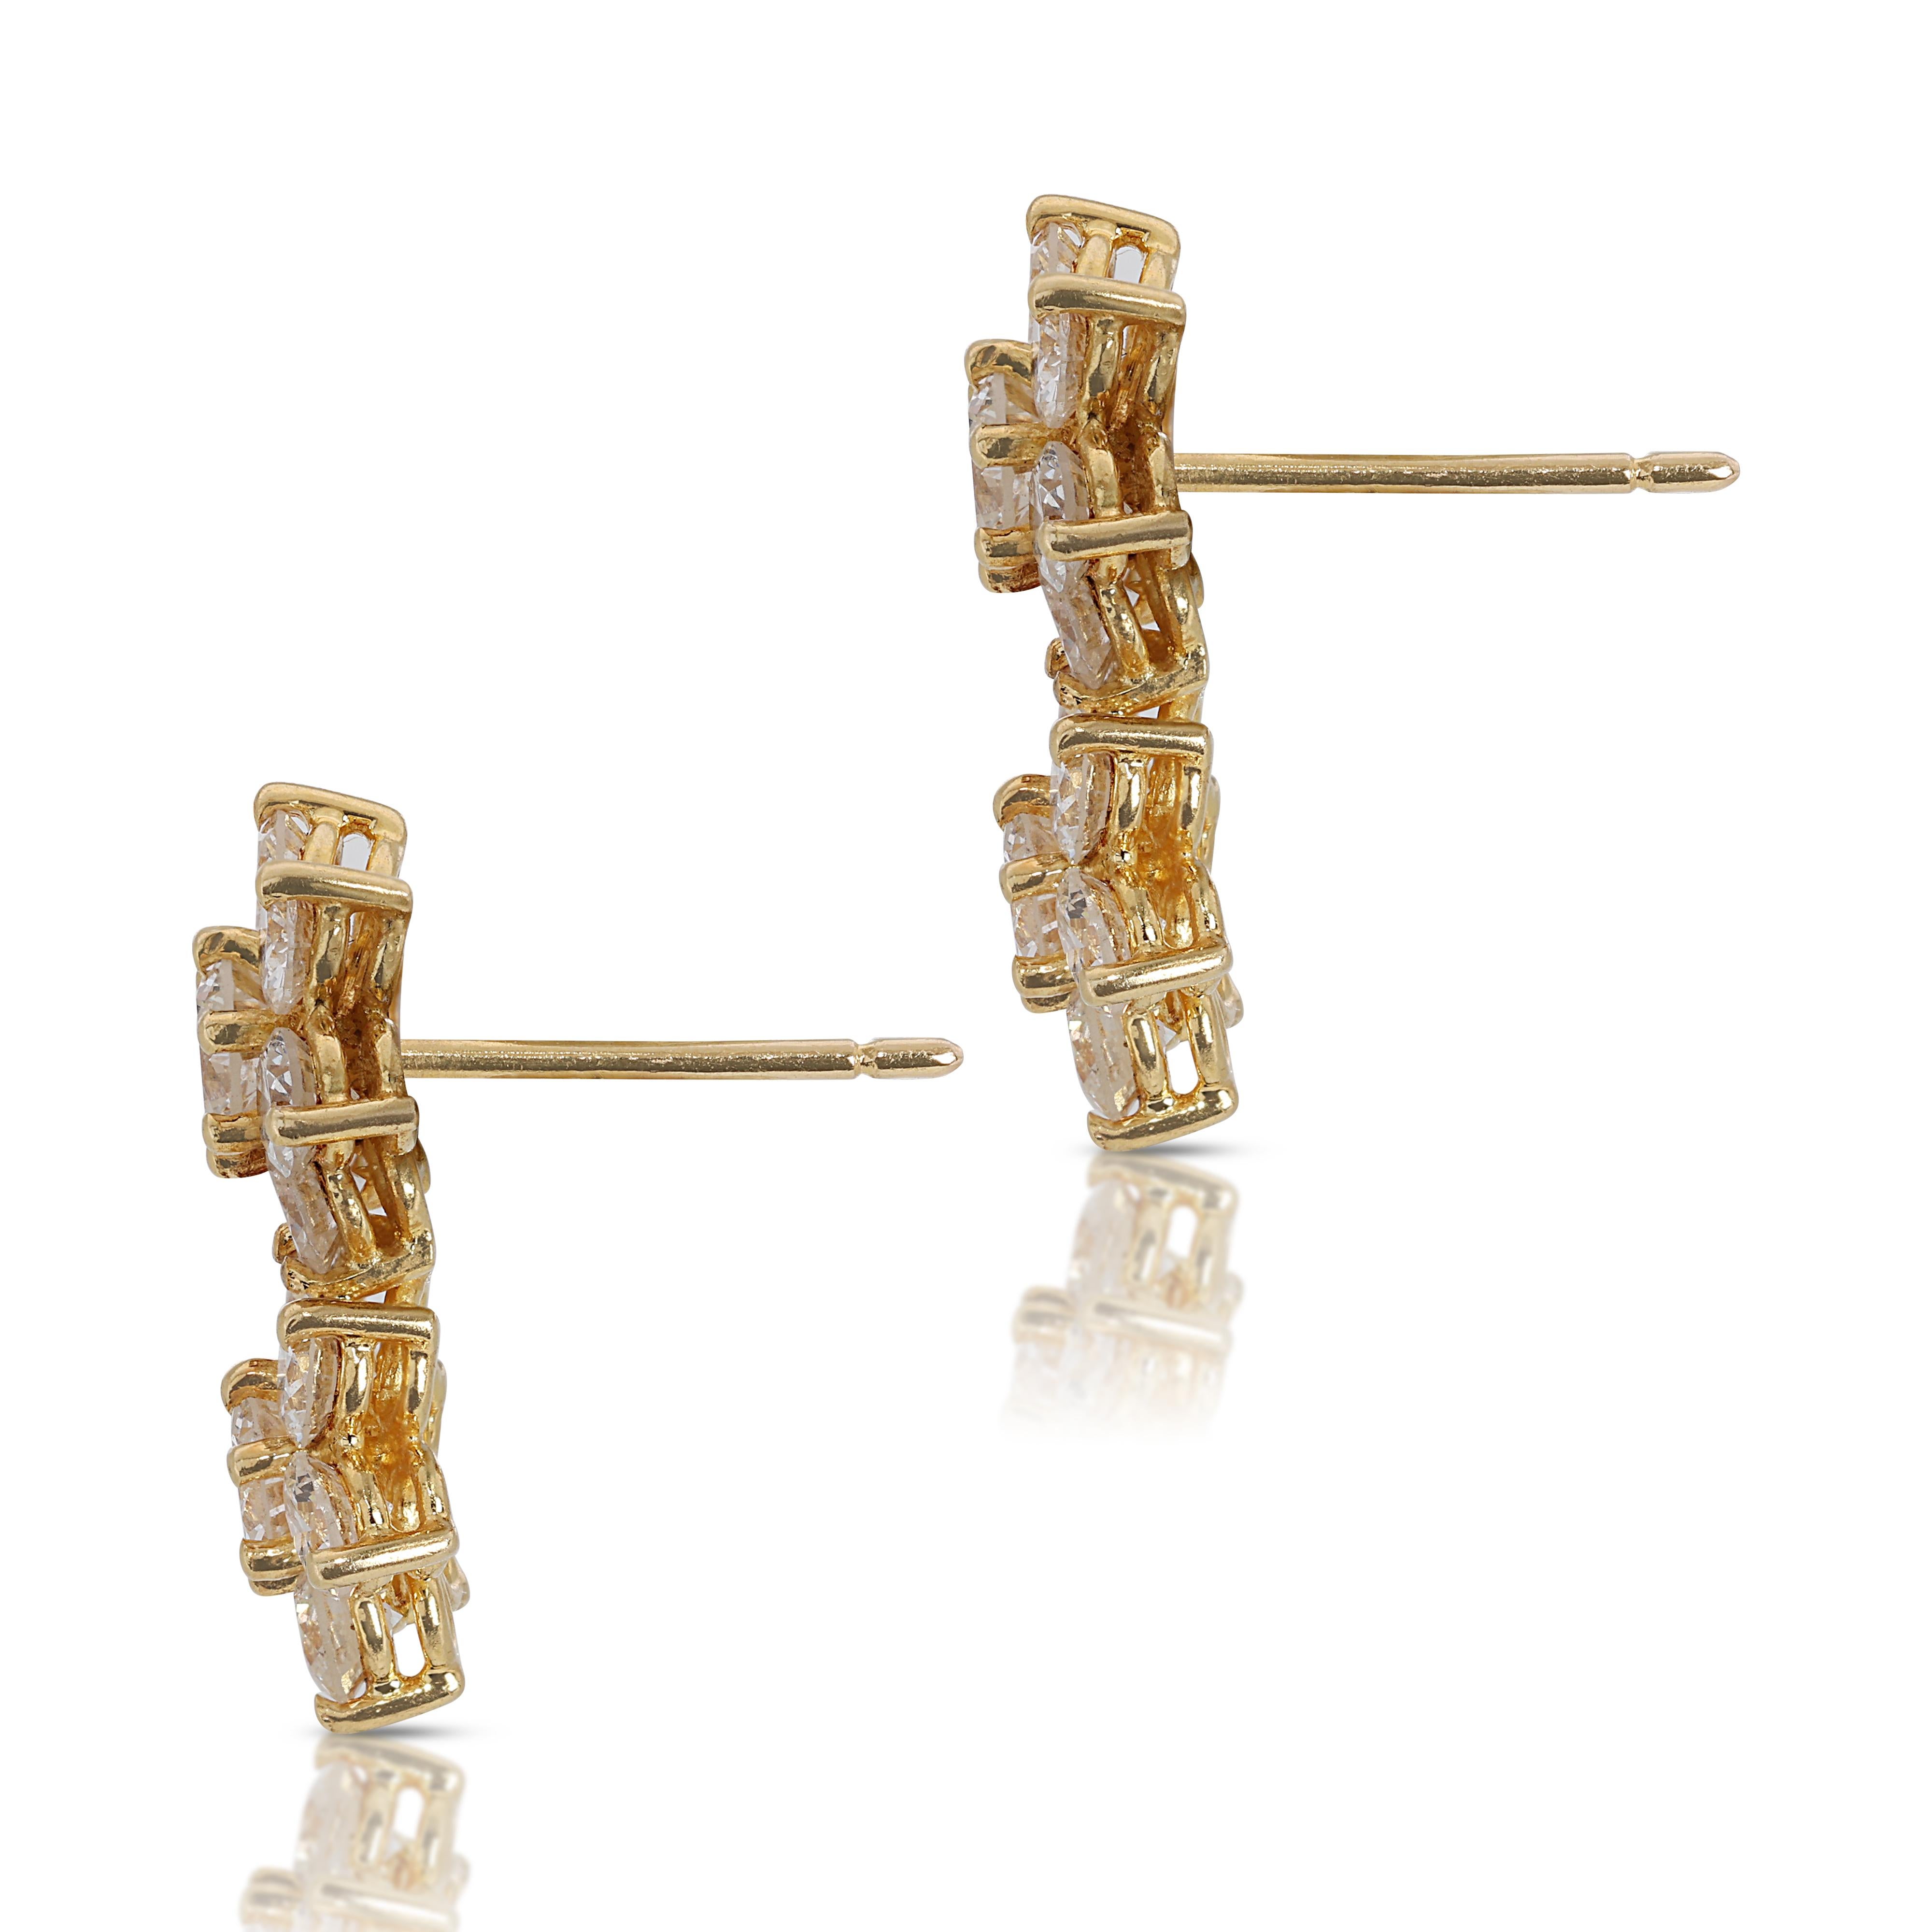 Stunning 1.52ct Diamonds Stud Earrings in 18K Yellow Gold In Excellent Condition For Sale In רמת גן, IL